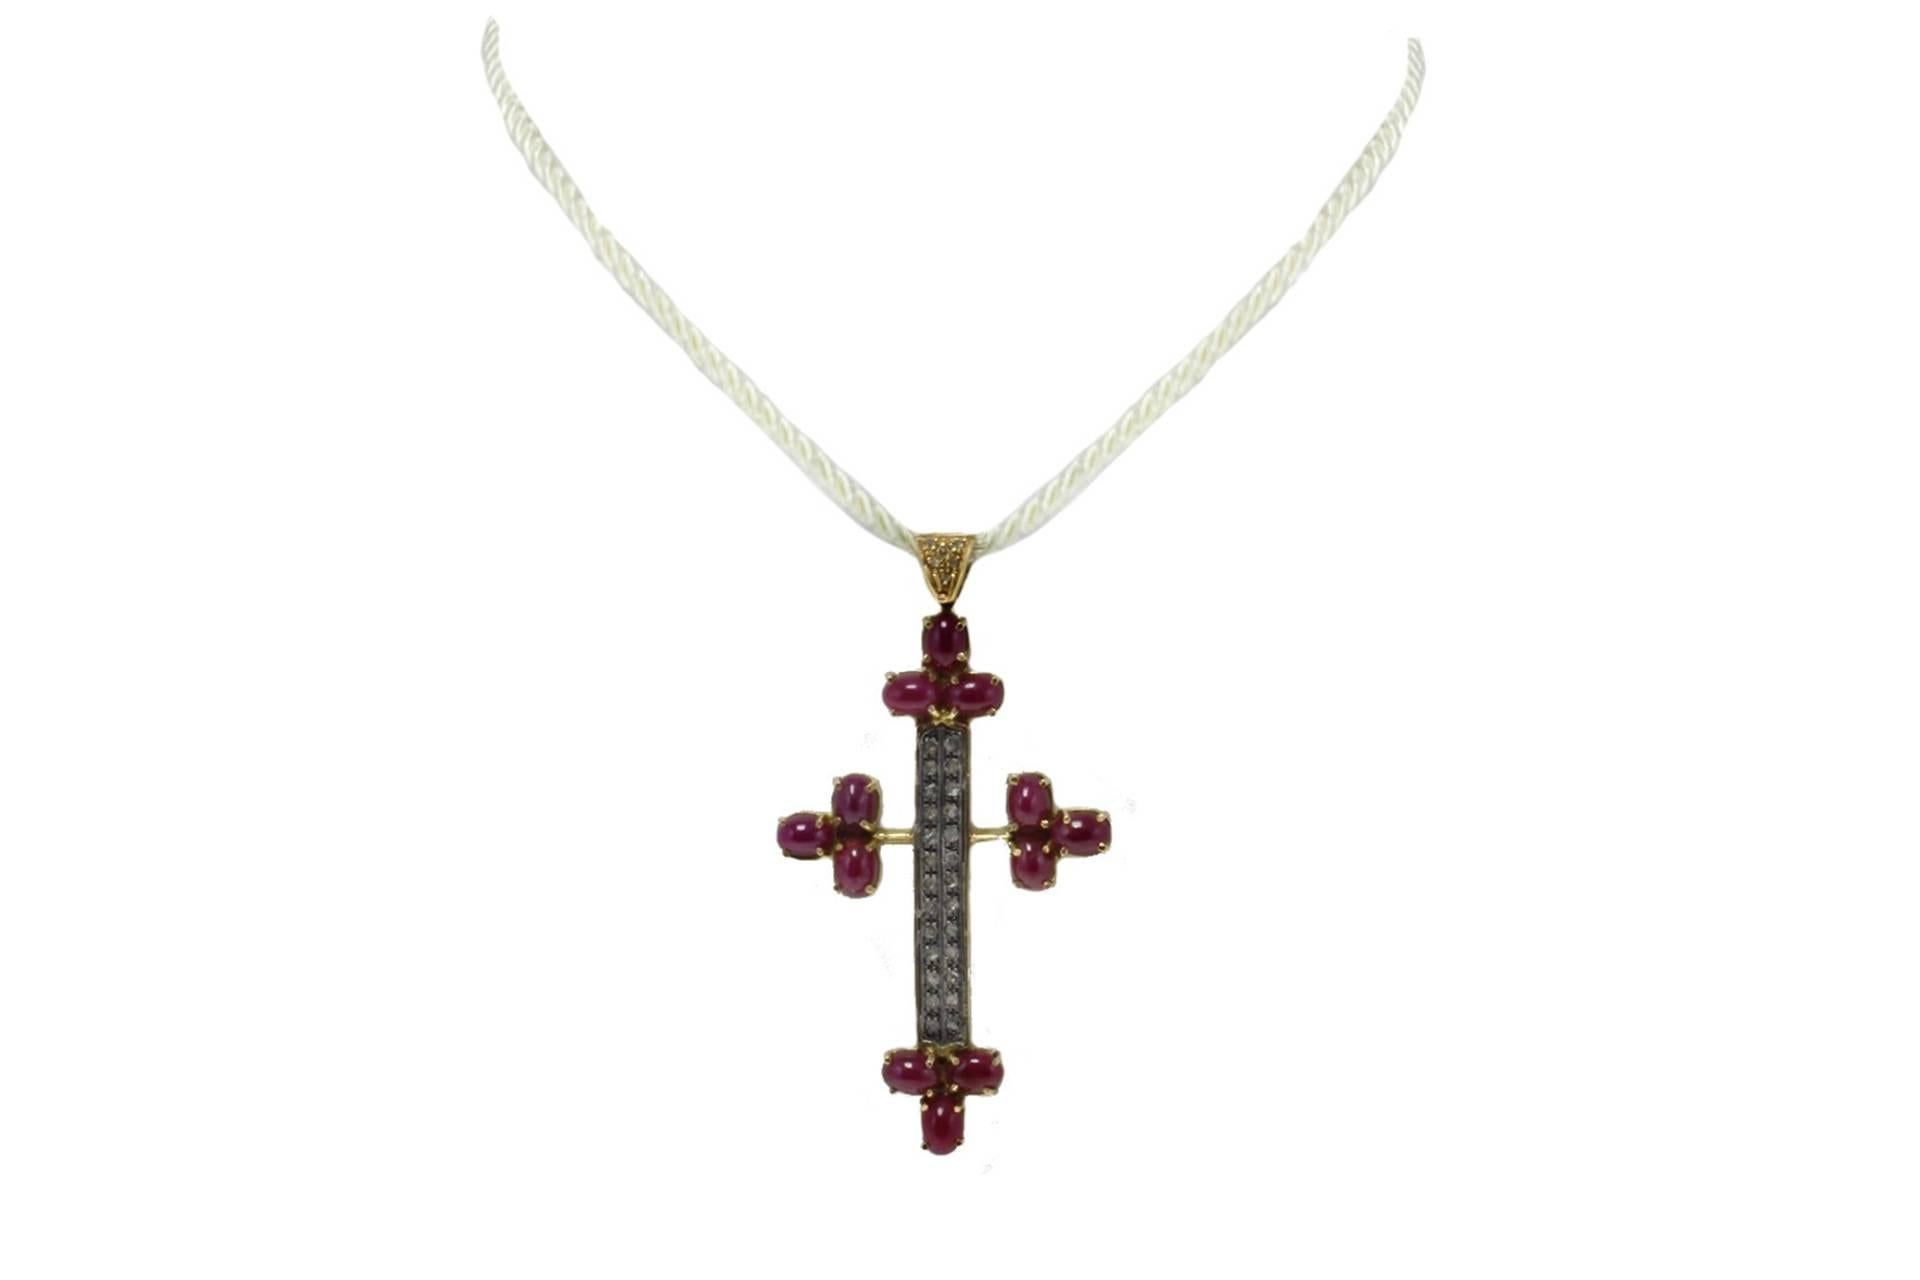 Cross pendant necklace in 14kt yellow gold and silver composed of two diamonds stripes and three rubies each extremities.

tot weight 11.6gr
r.f.  ric